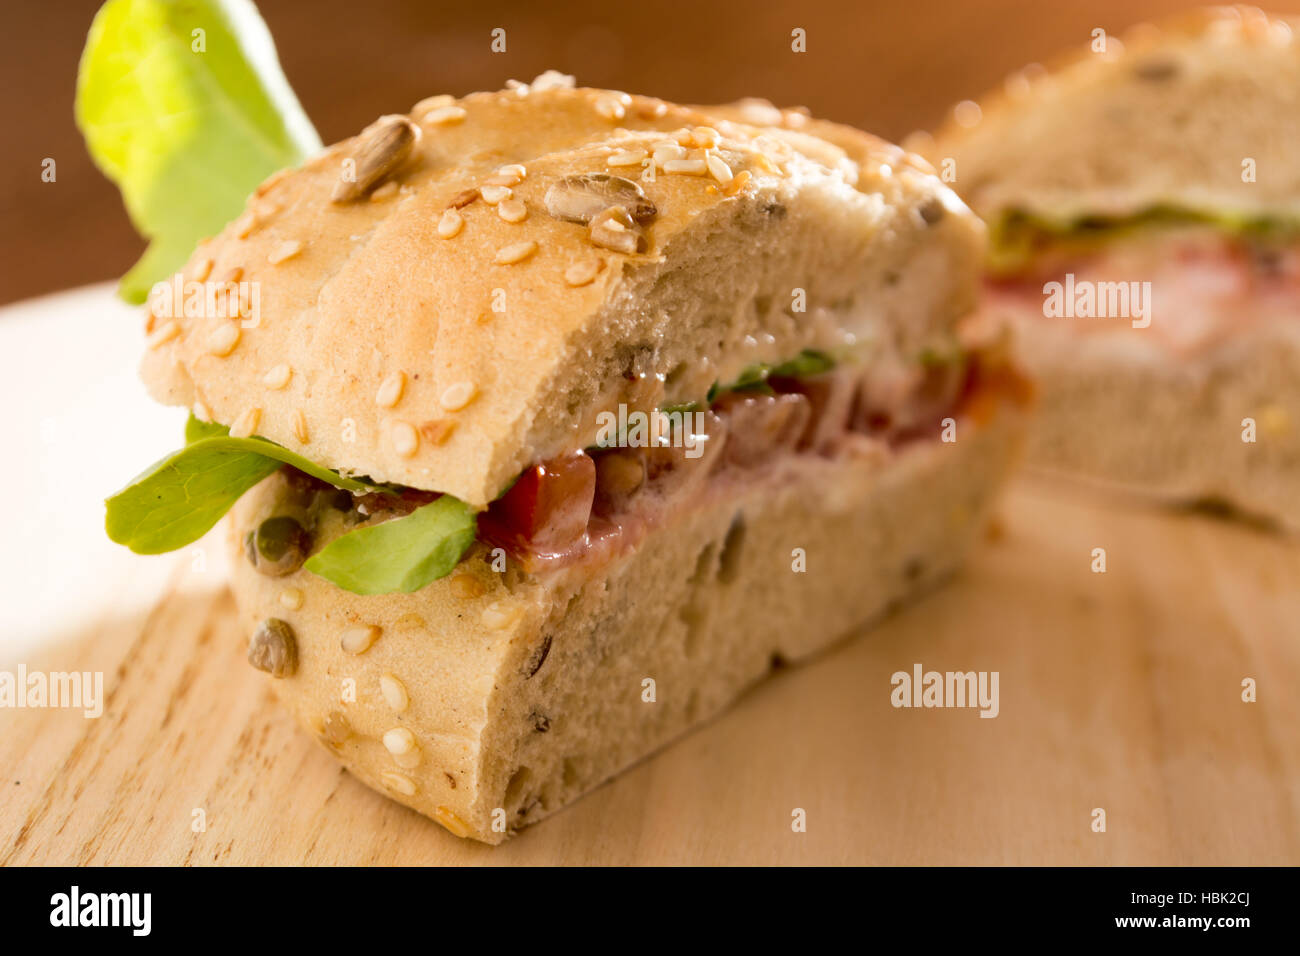 Sandwich cut in half with fresh smoked meat Stock Photo